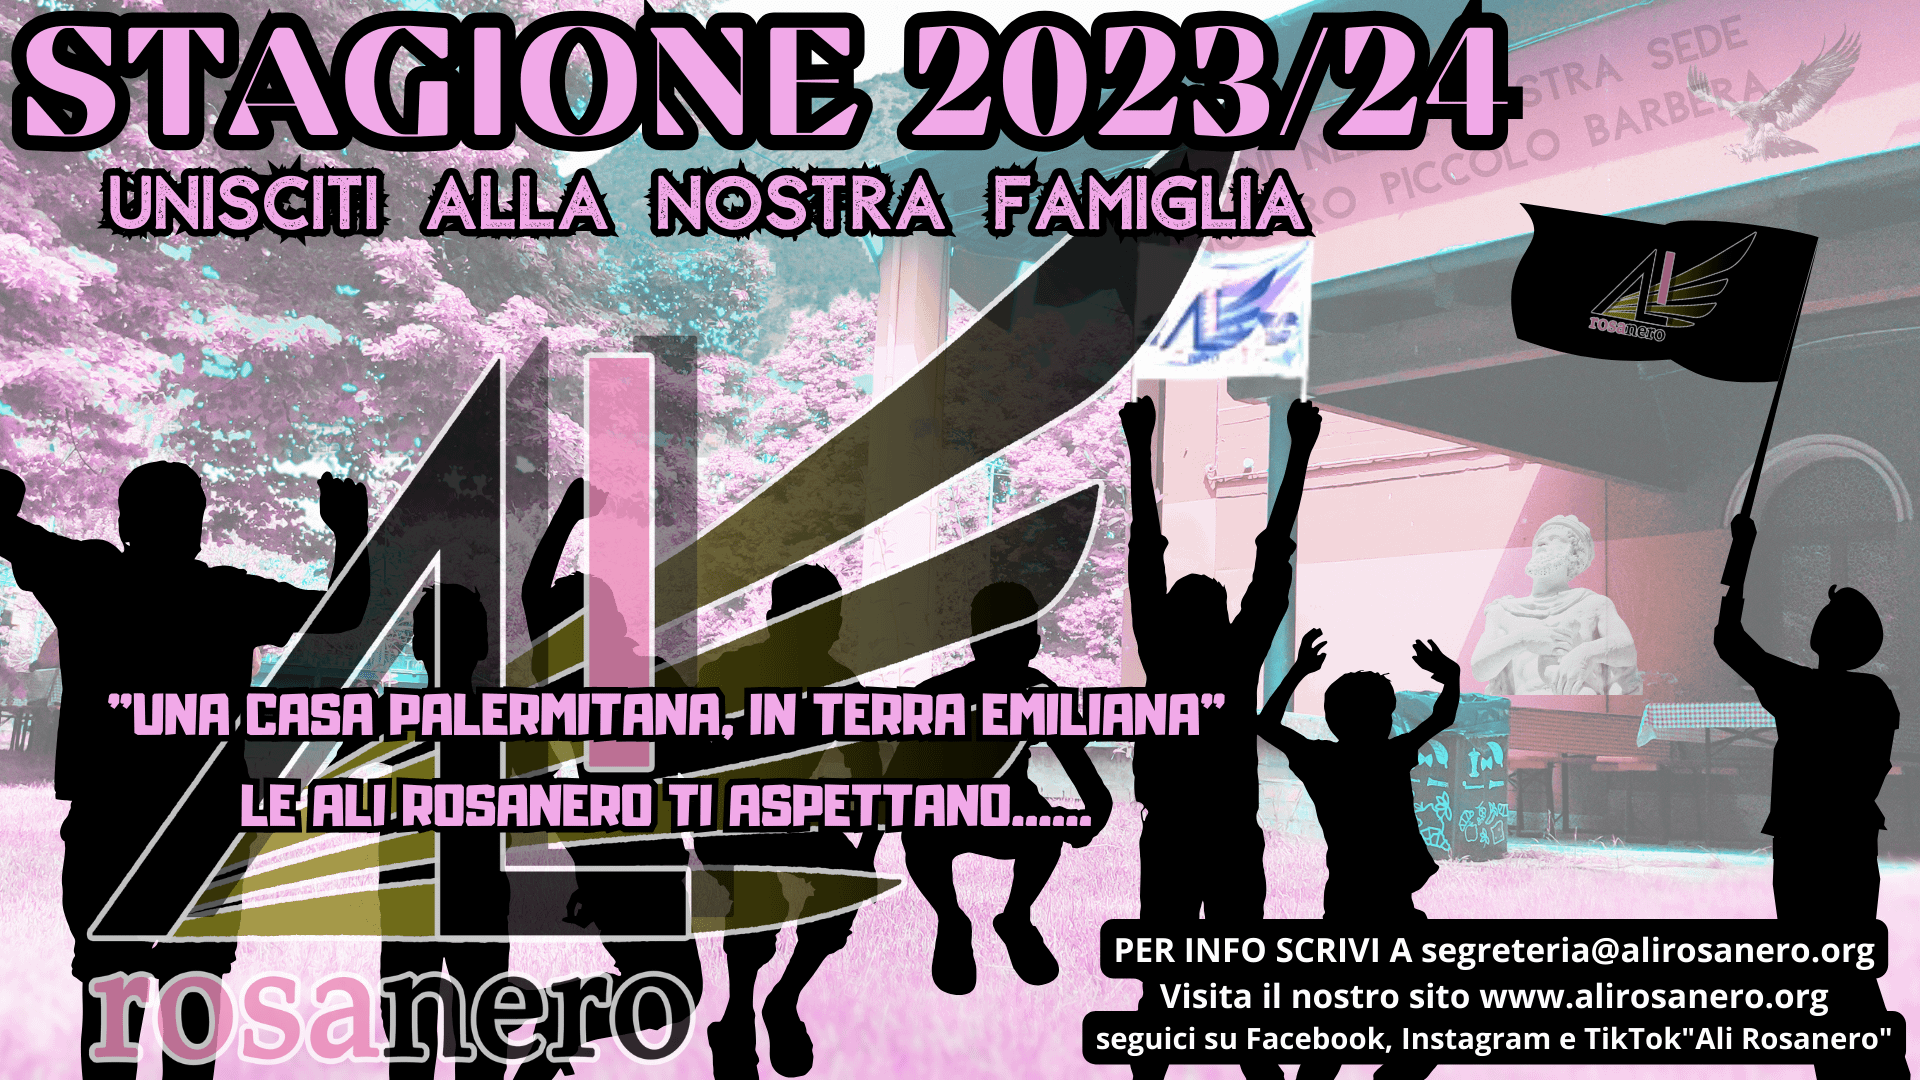 STAGIONE 2023/2024